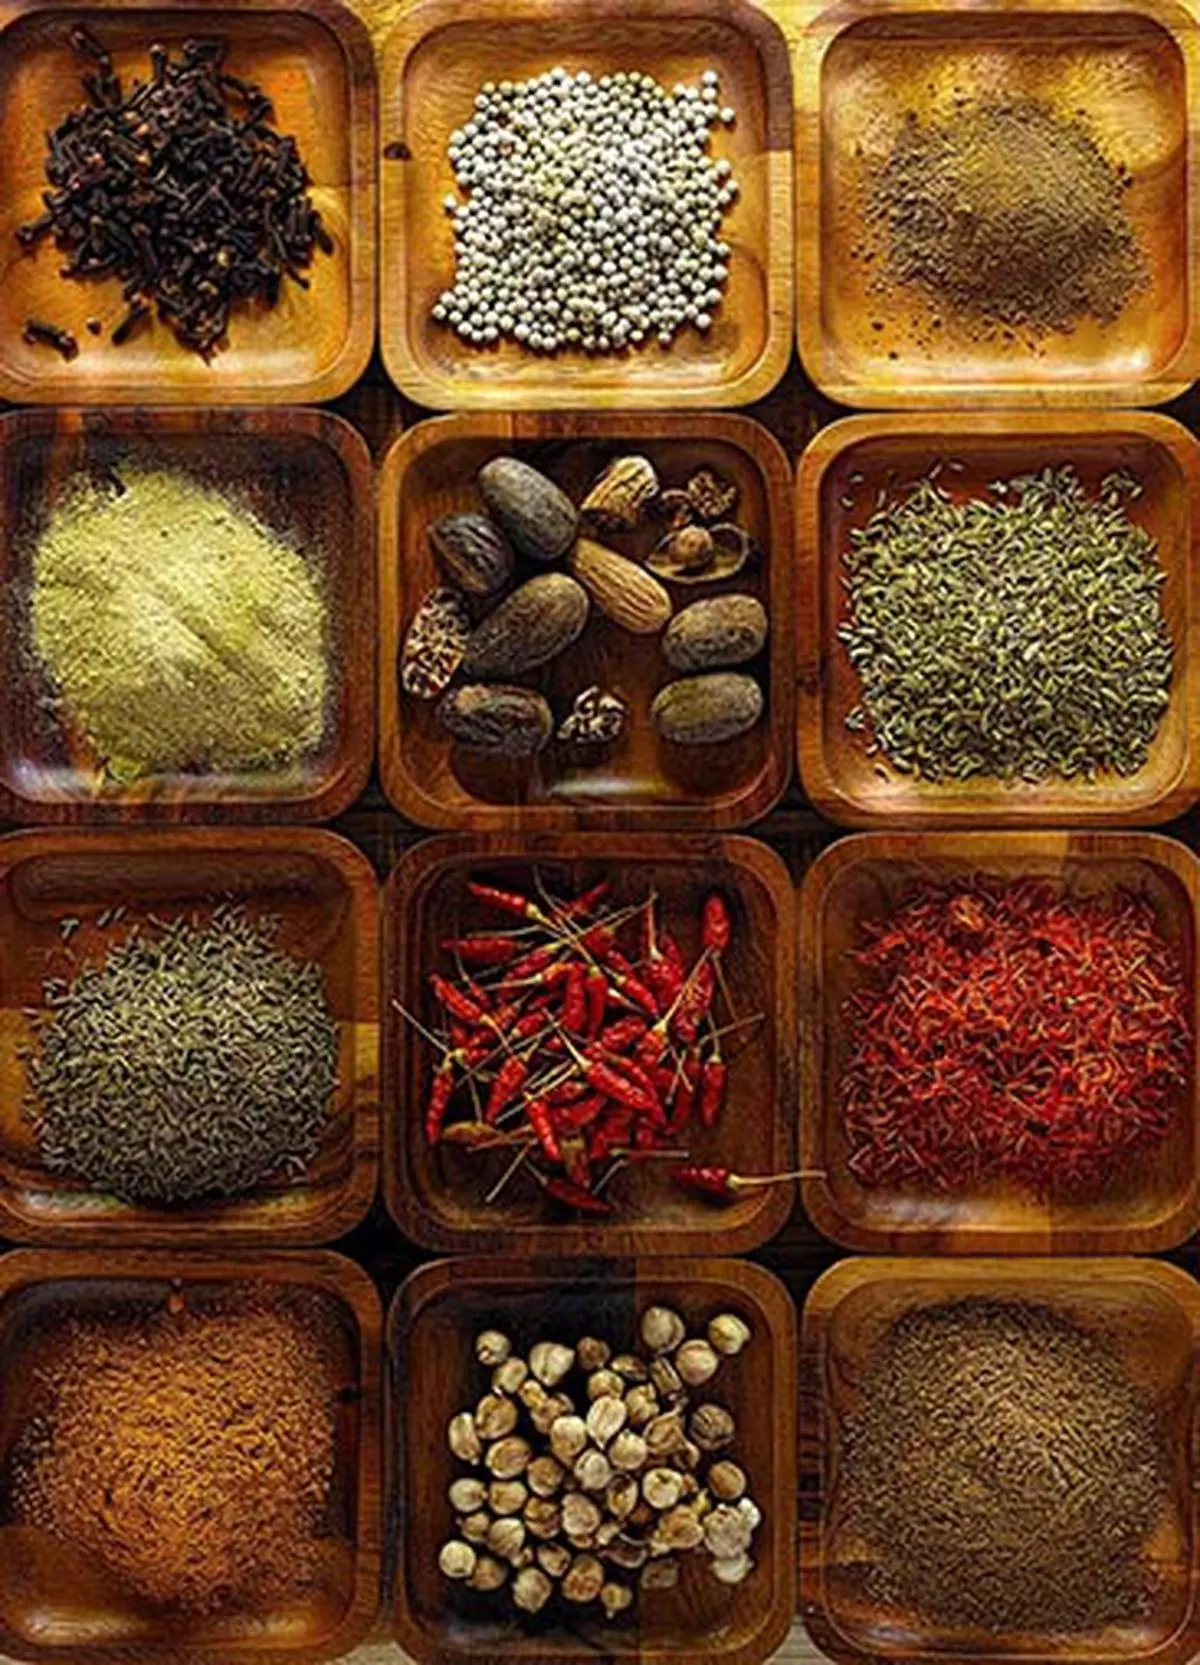 File Photo: Indian cooking spices in wooden trays.